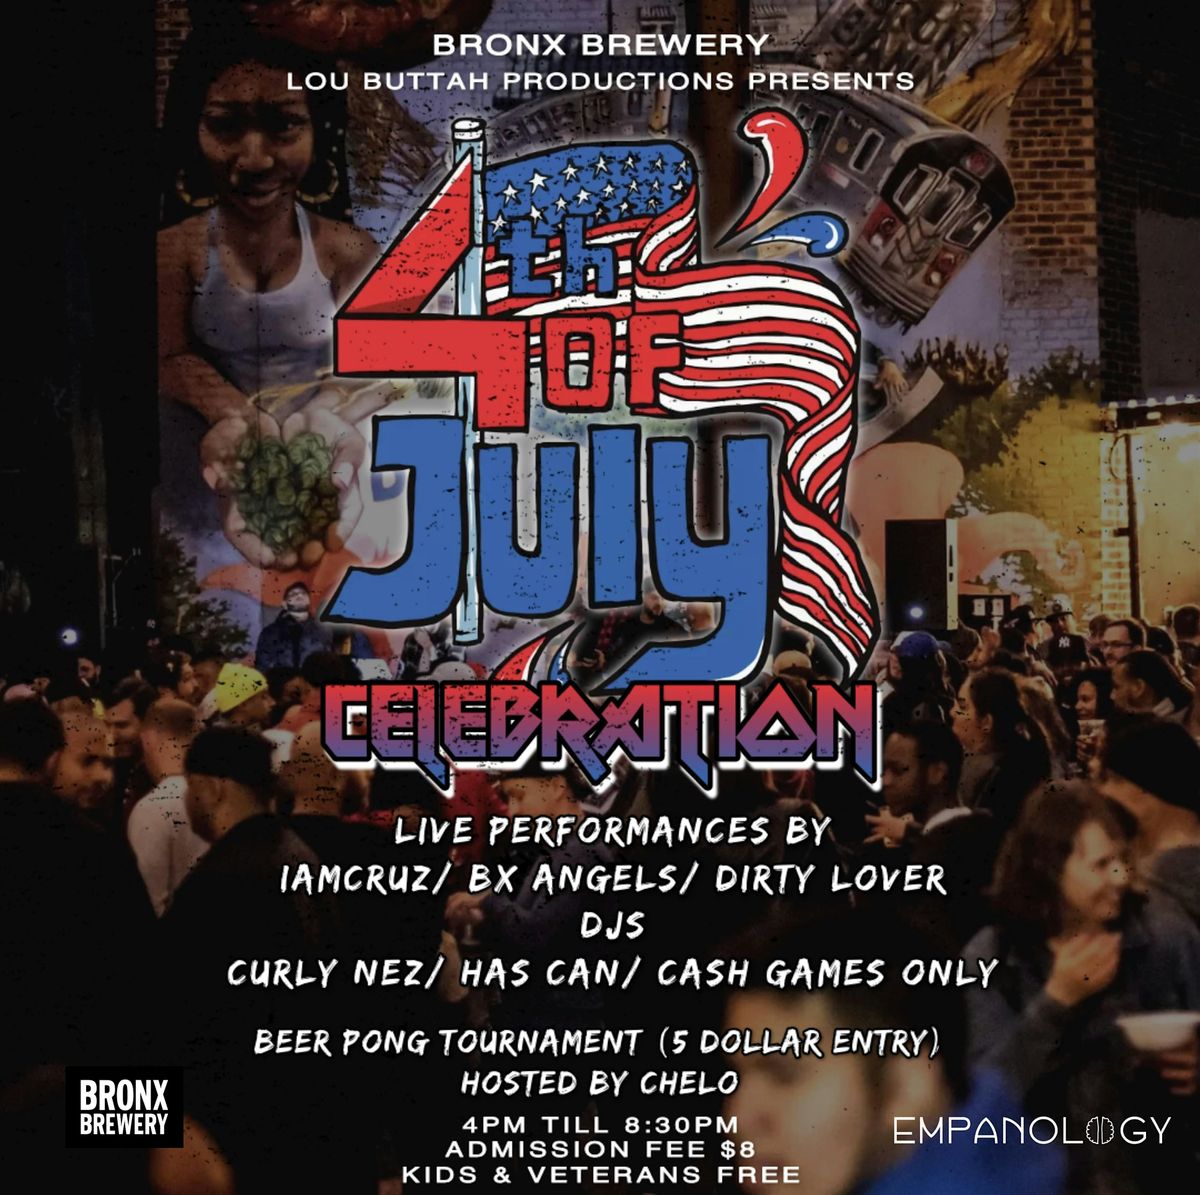 4th of July celebration at The Bronx Brewery presented by Lou Buttah Pro.